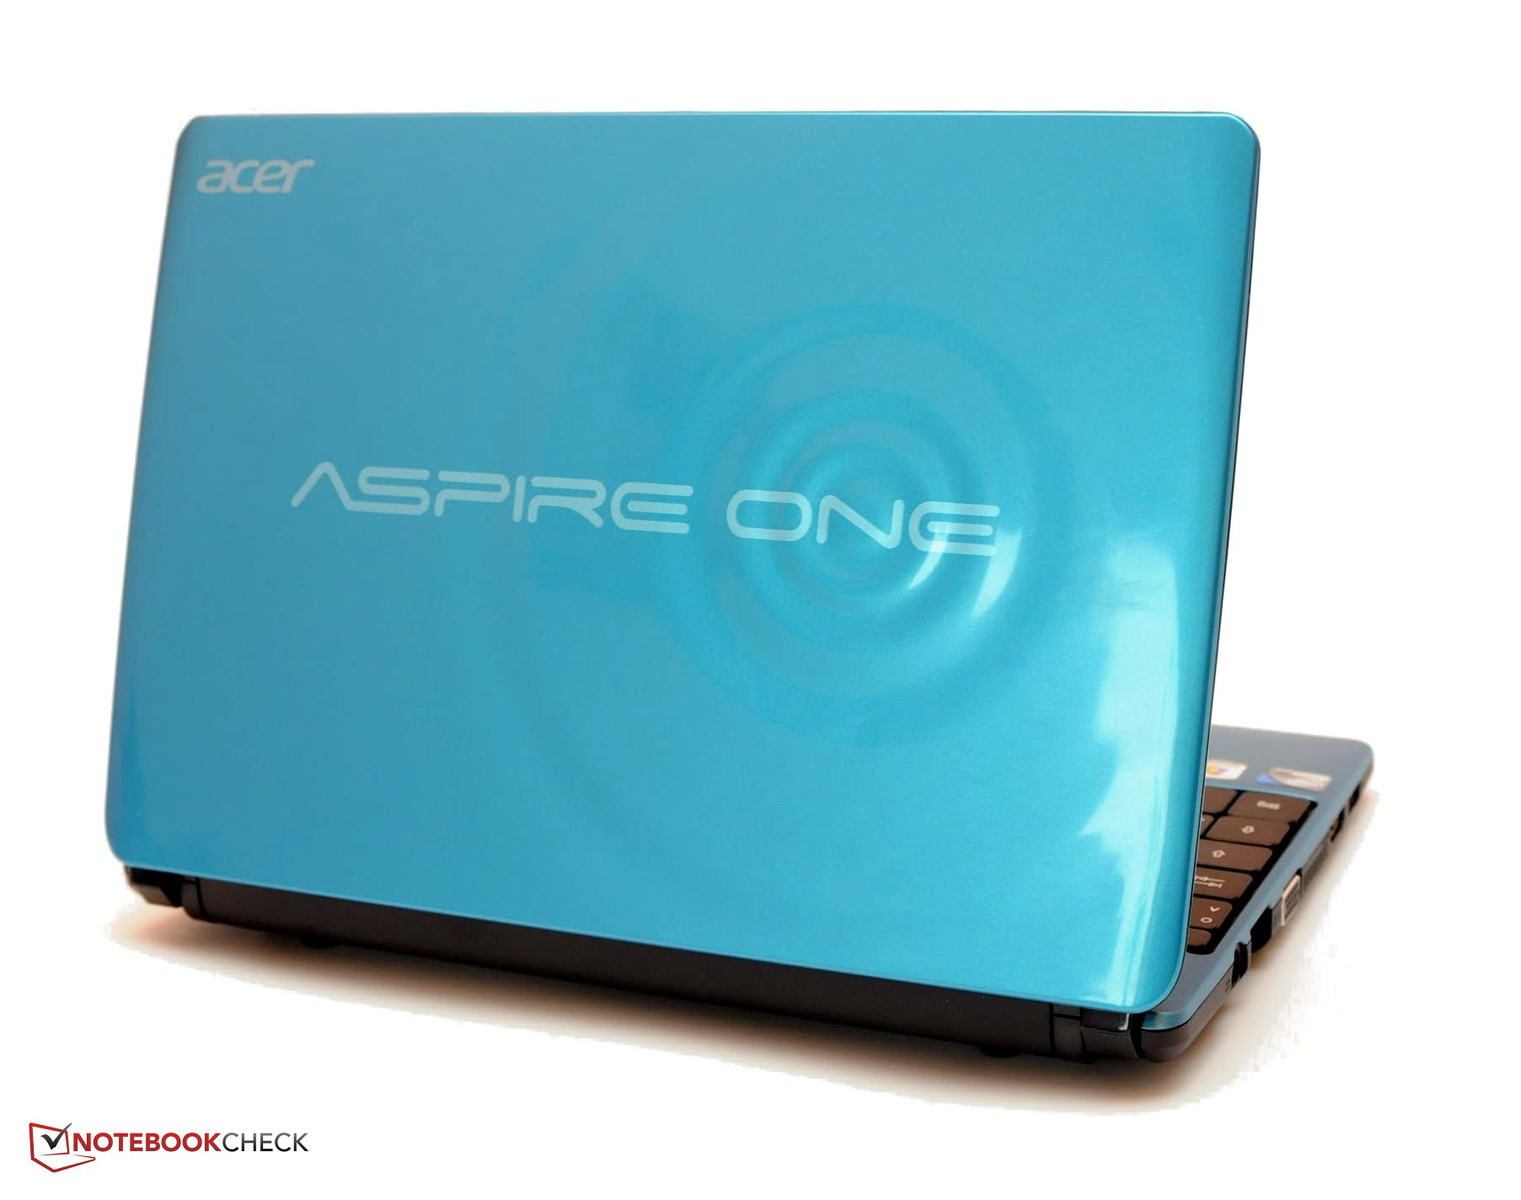 Aspire запчасти. ASUS Aspire one d270. Acer Aspire one d270. Acer Aspire one d270-26dbb. Нетбук Асер Aspire one d270.